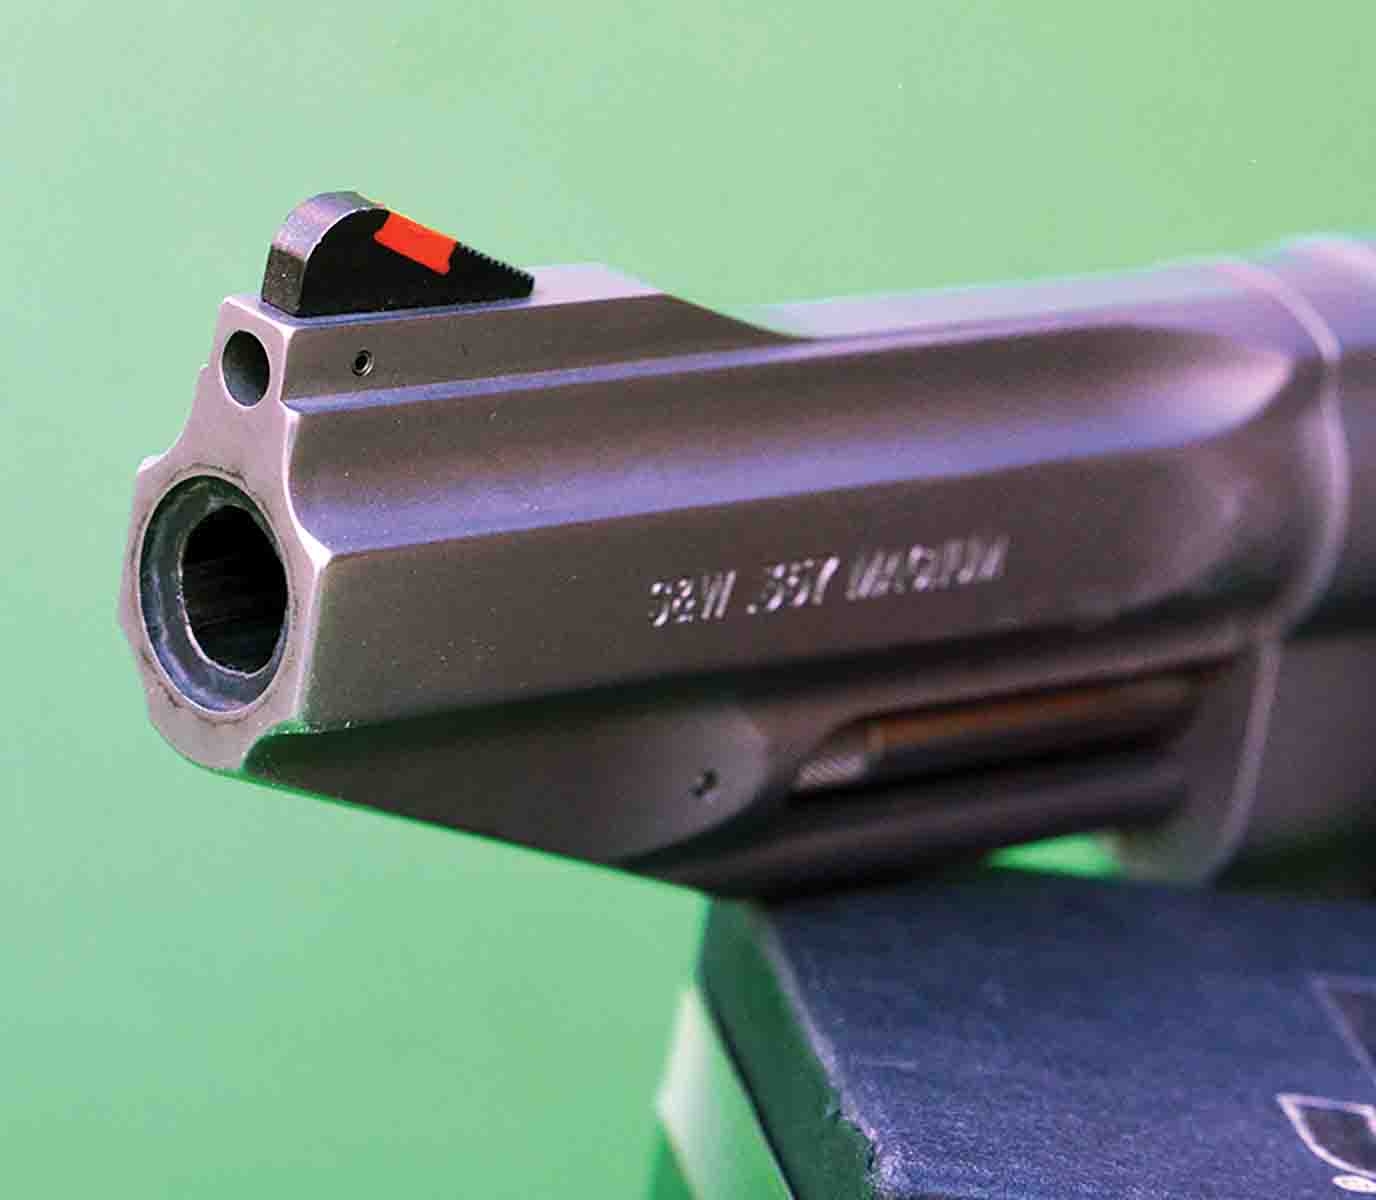 The S&W Model 627 features an interchangeable red insert front-sight blade.